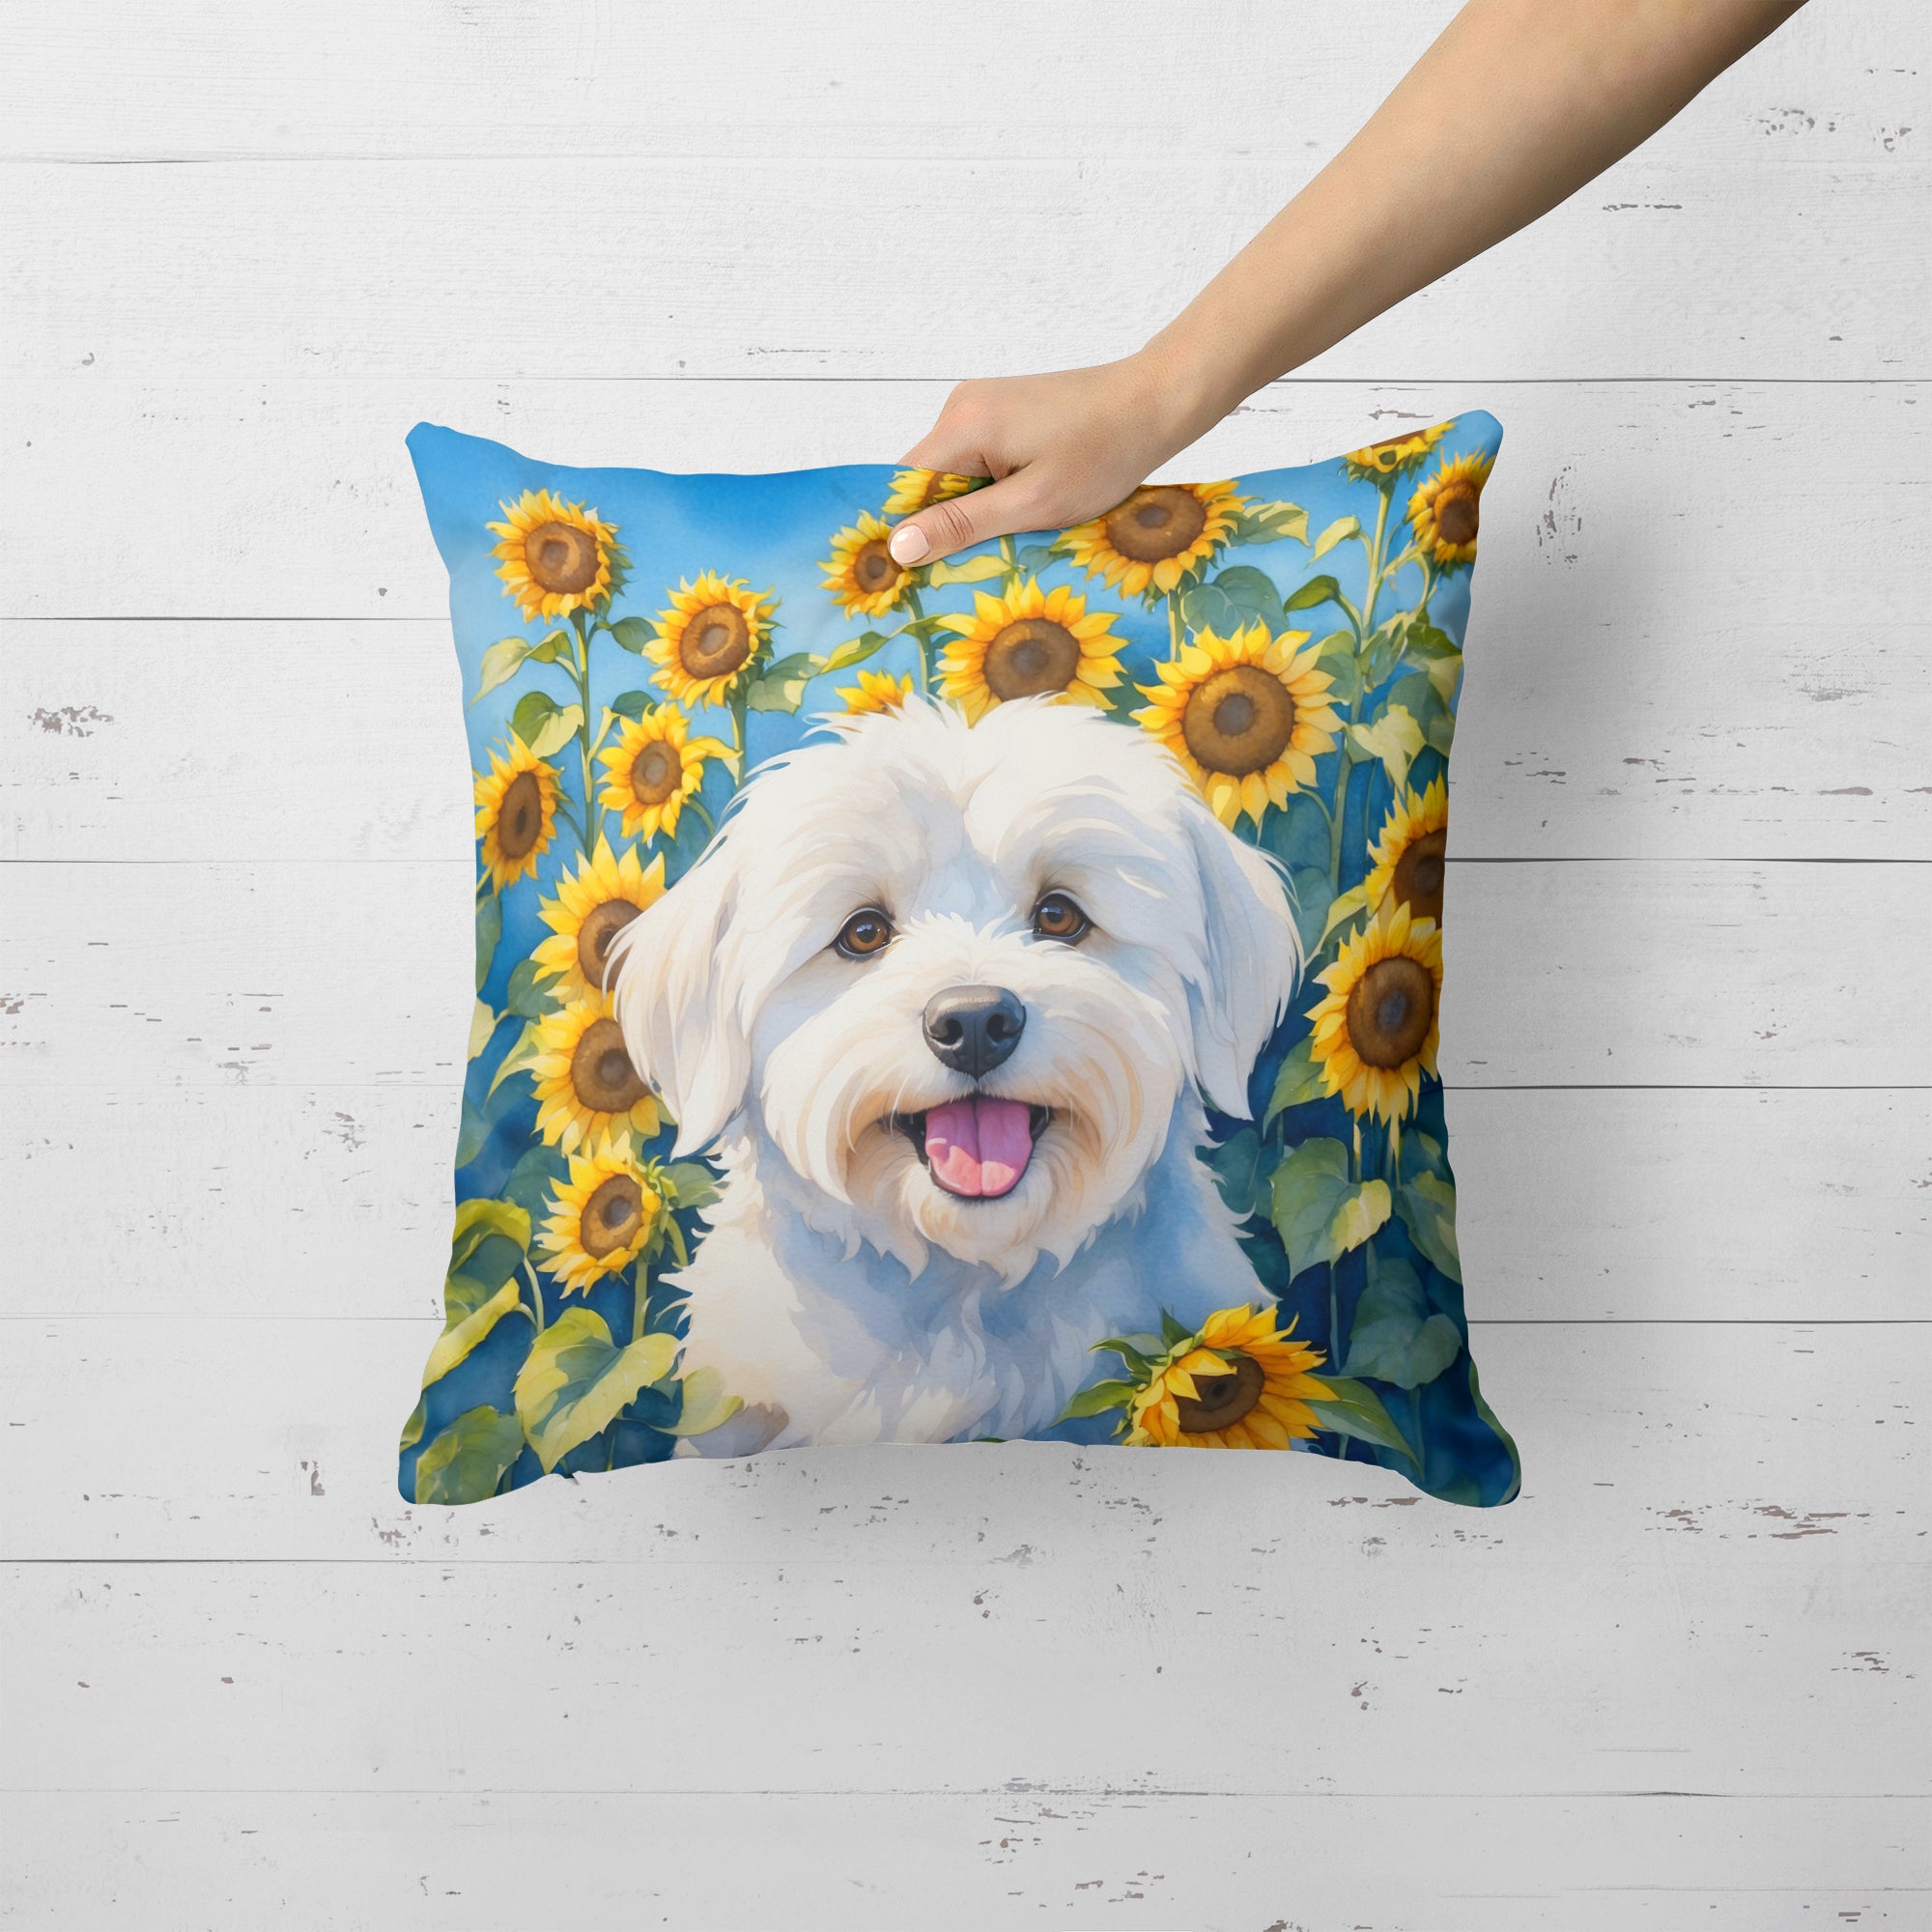 Buy this Coton de Tulear in Sunflowers Throw Pillow